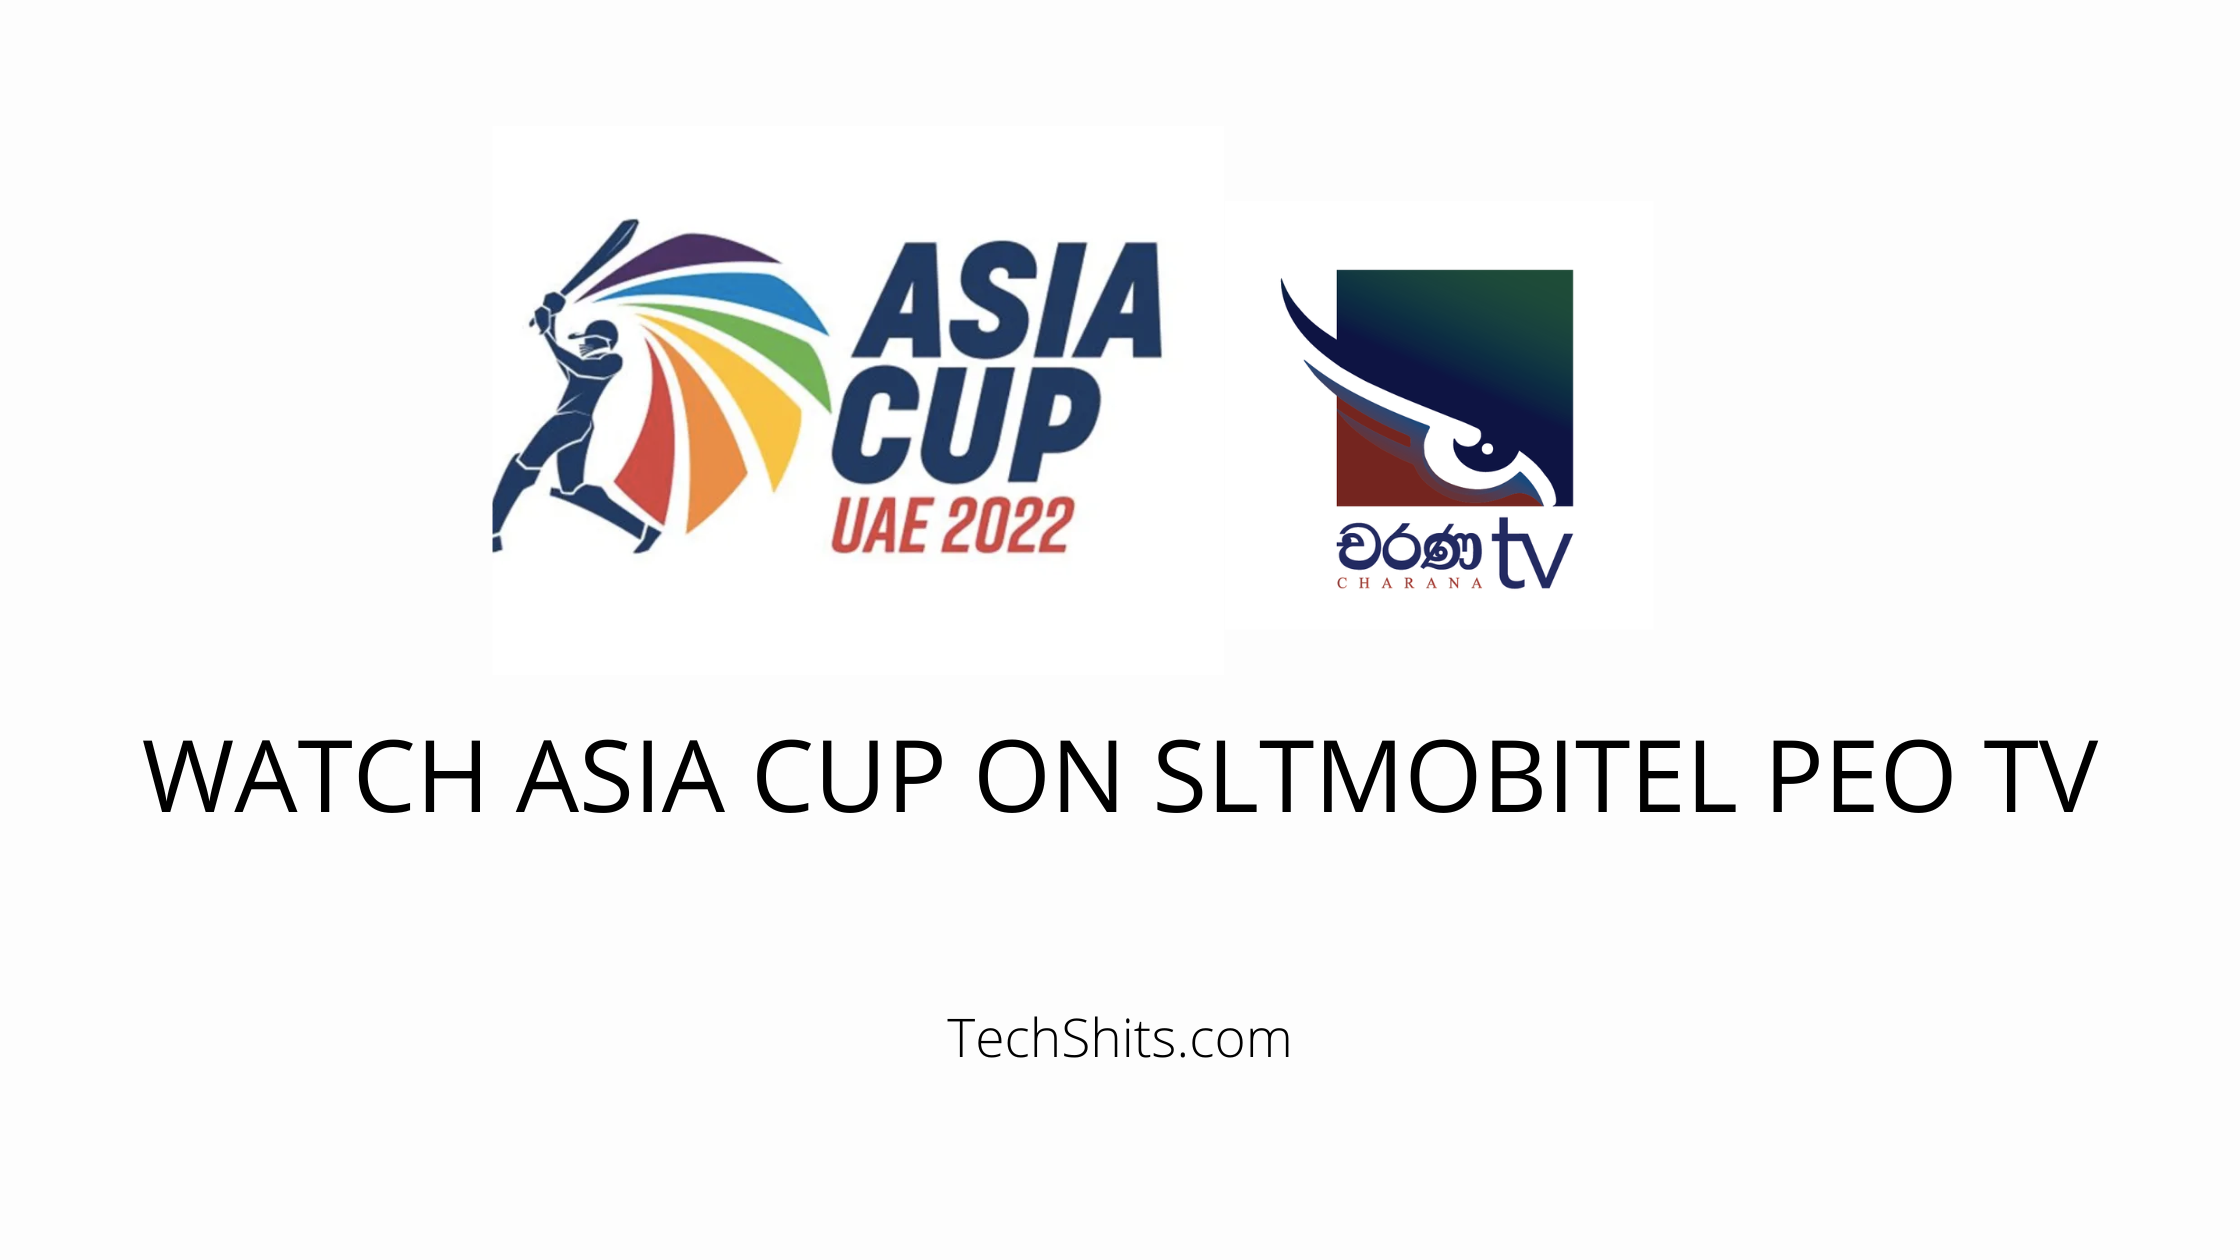 WATCH ASIA CUP ON SLTMOBITEL PEO TV